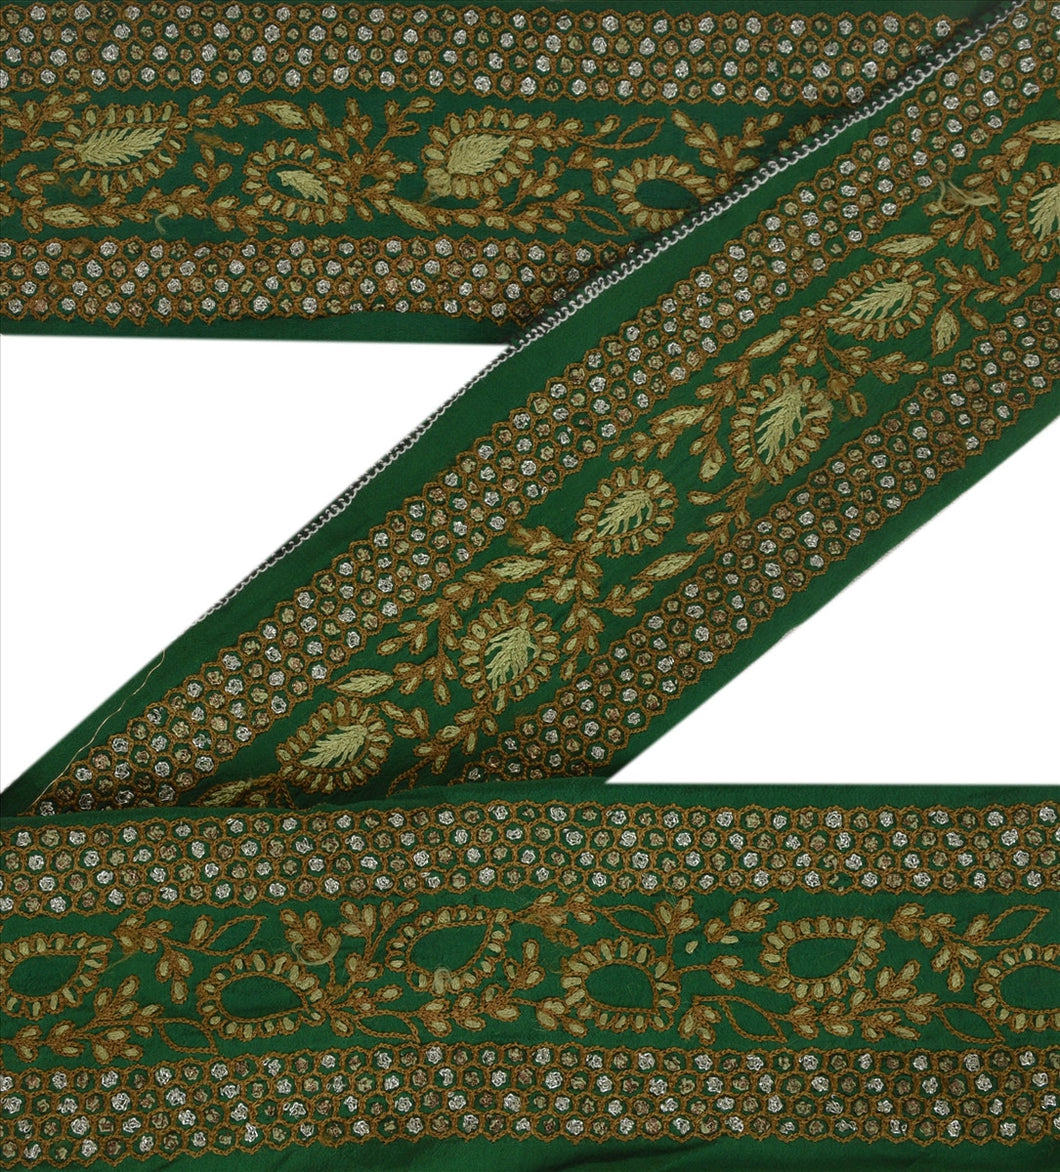 Antique Vintage Saree Border Hand Embroidered Craft Trims Lace 3.5